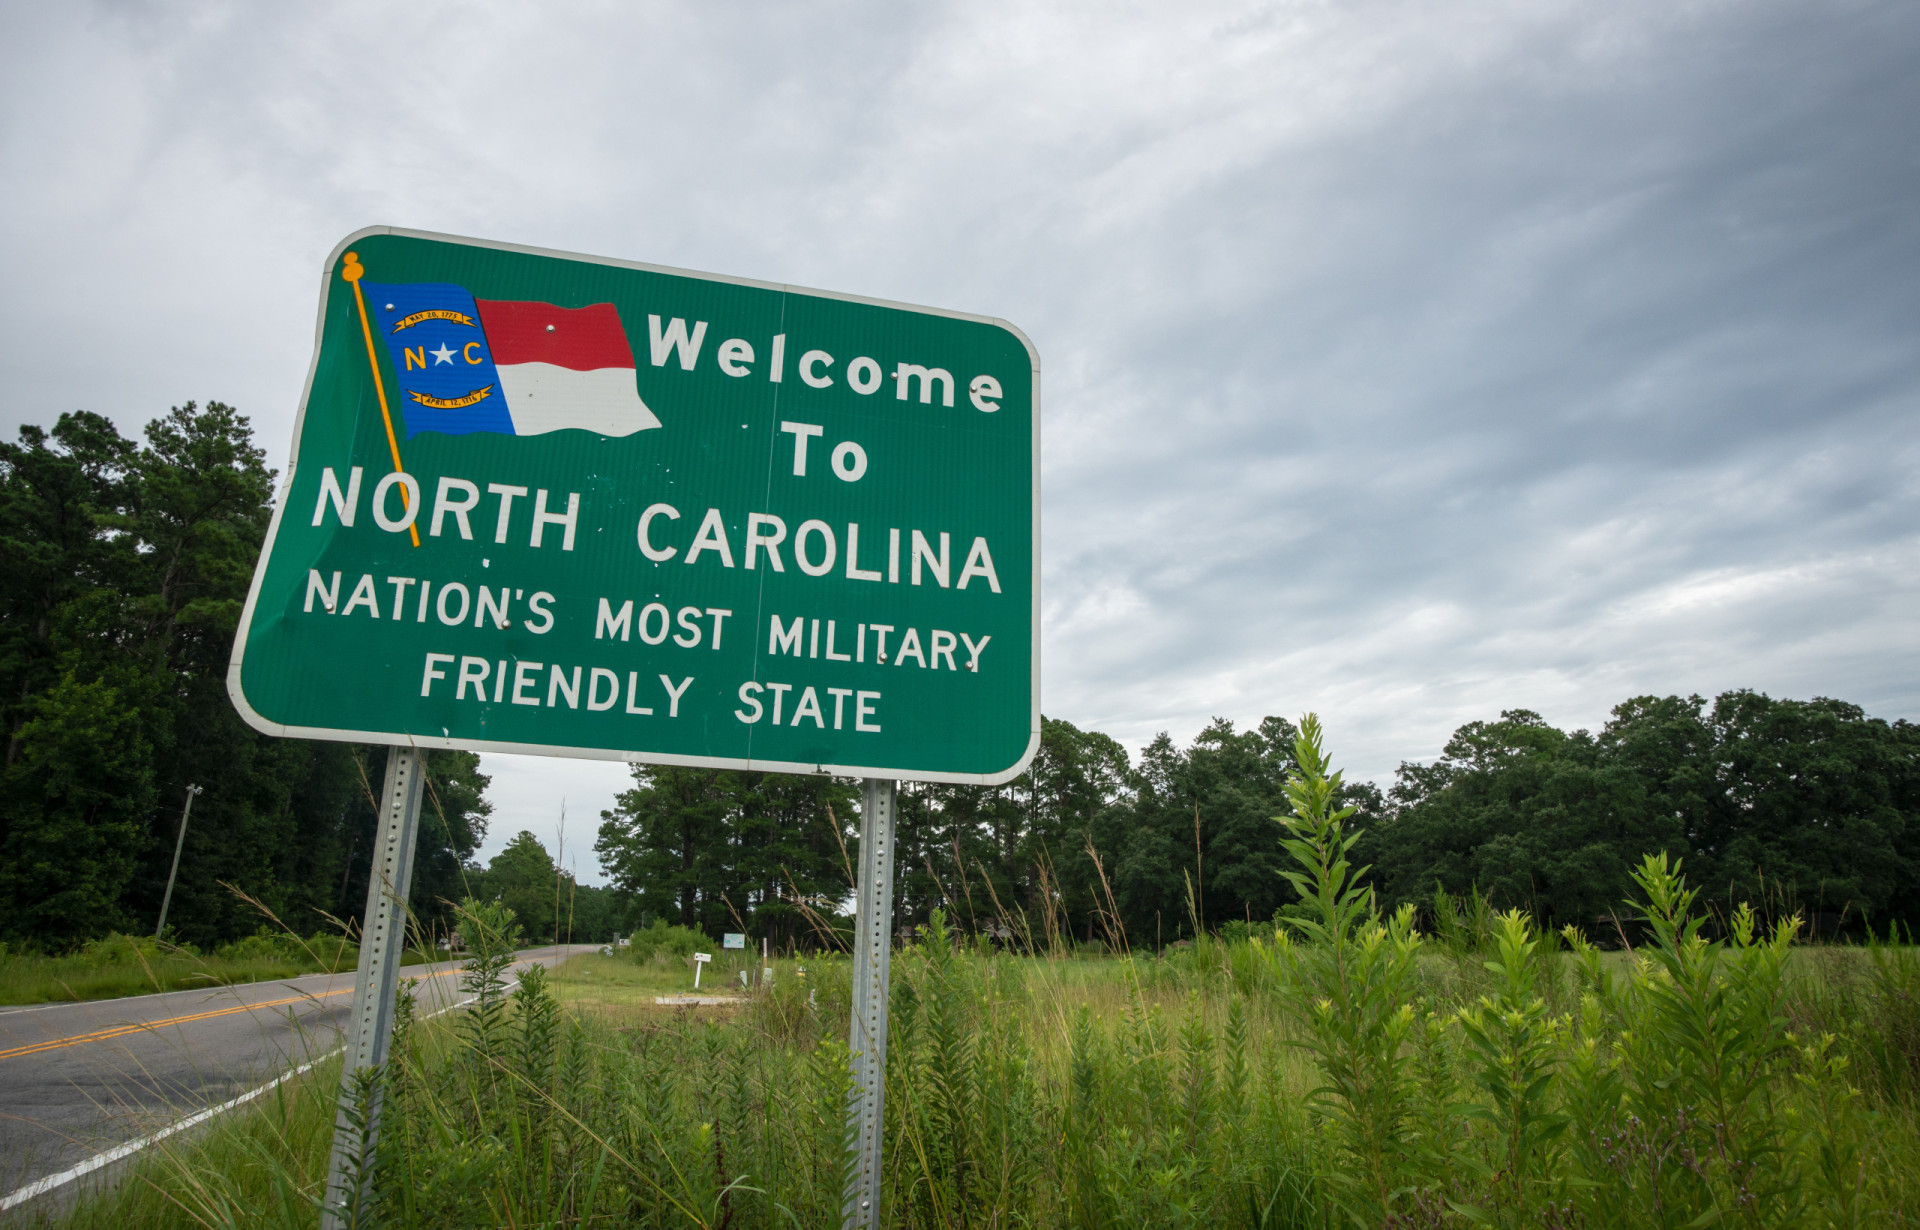 <p>North Carolina takes great pride in its military and veterans communities, and this is reflected on the state's welcome sign. </p><p><a href="https://www.msn.com/en-us/community/channel/vid-7xx8mnucu55yw63we9va2gwr7uihbxwc68fxqp25x6tg4ftibpra?cvid=94631541bc0f4f89bfd59158d696ad7e">Follow us and access great exclusive content every day</a></p>